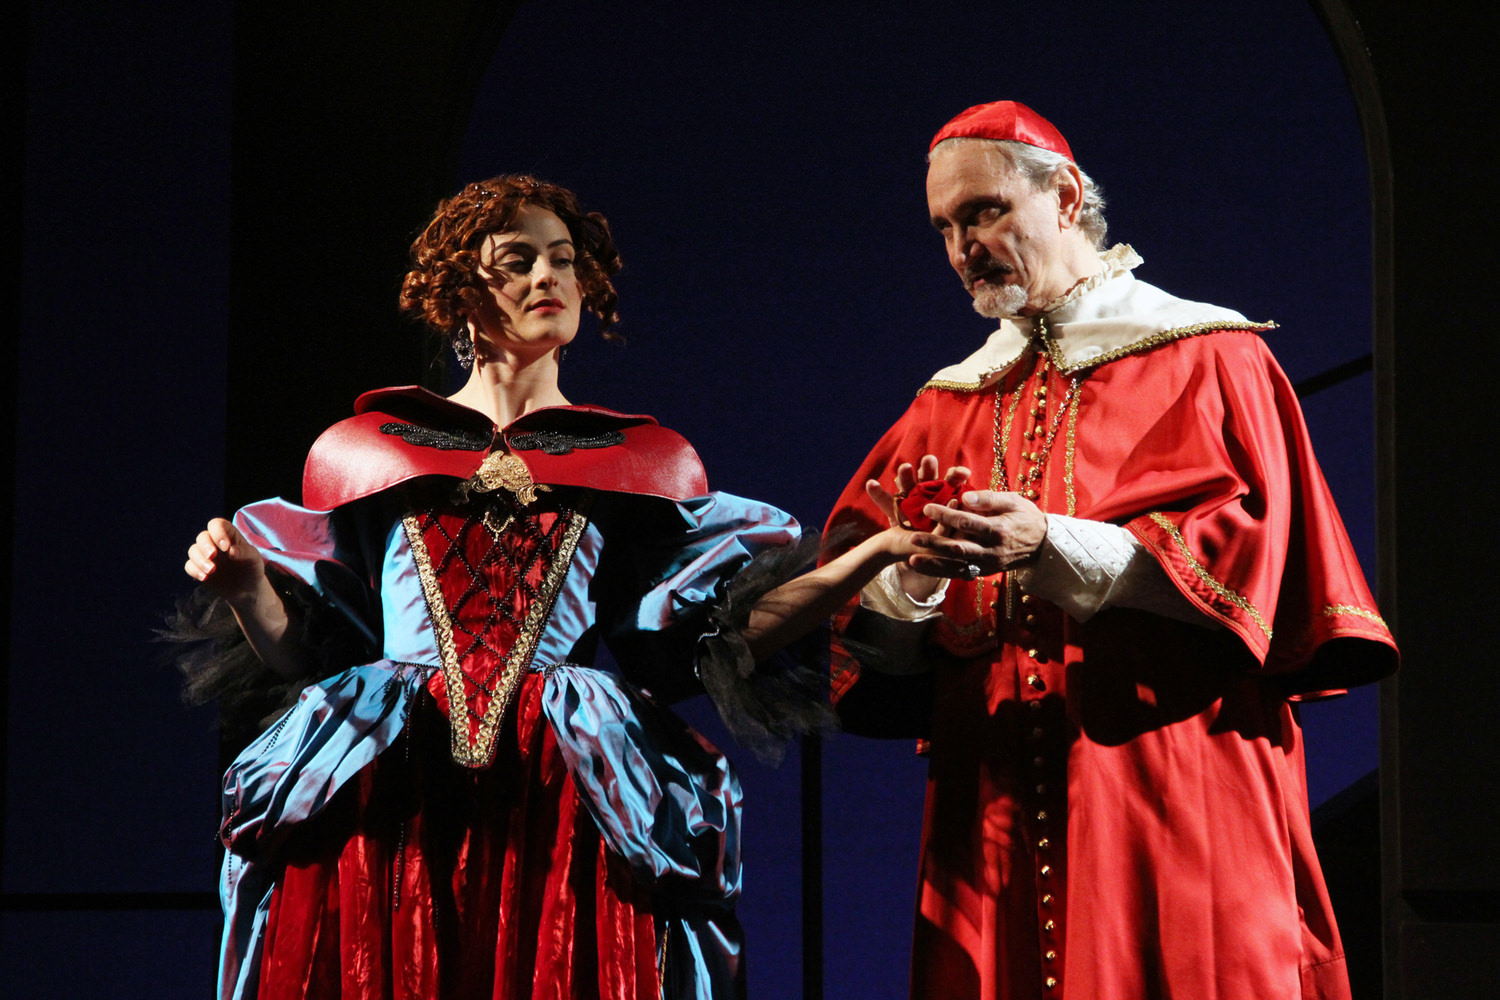 Olivia Saccomanno (Milady, The Countess de Winter) and three-time Obie Award-winning actor Rocco Sisto (Cardinal Richelieu) star in Connecticut Repertory Theatre's The Three Musketeers running November 21 through December 8 at the Harriet S. Jorgensen Theatre in Storrs, CT. 